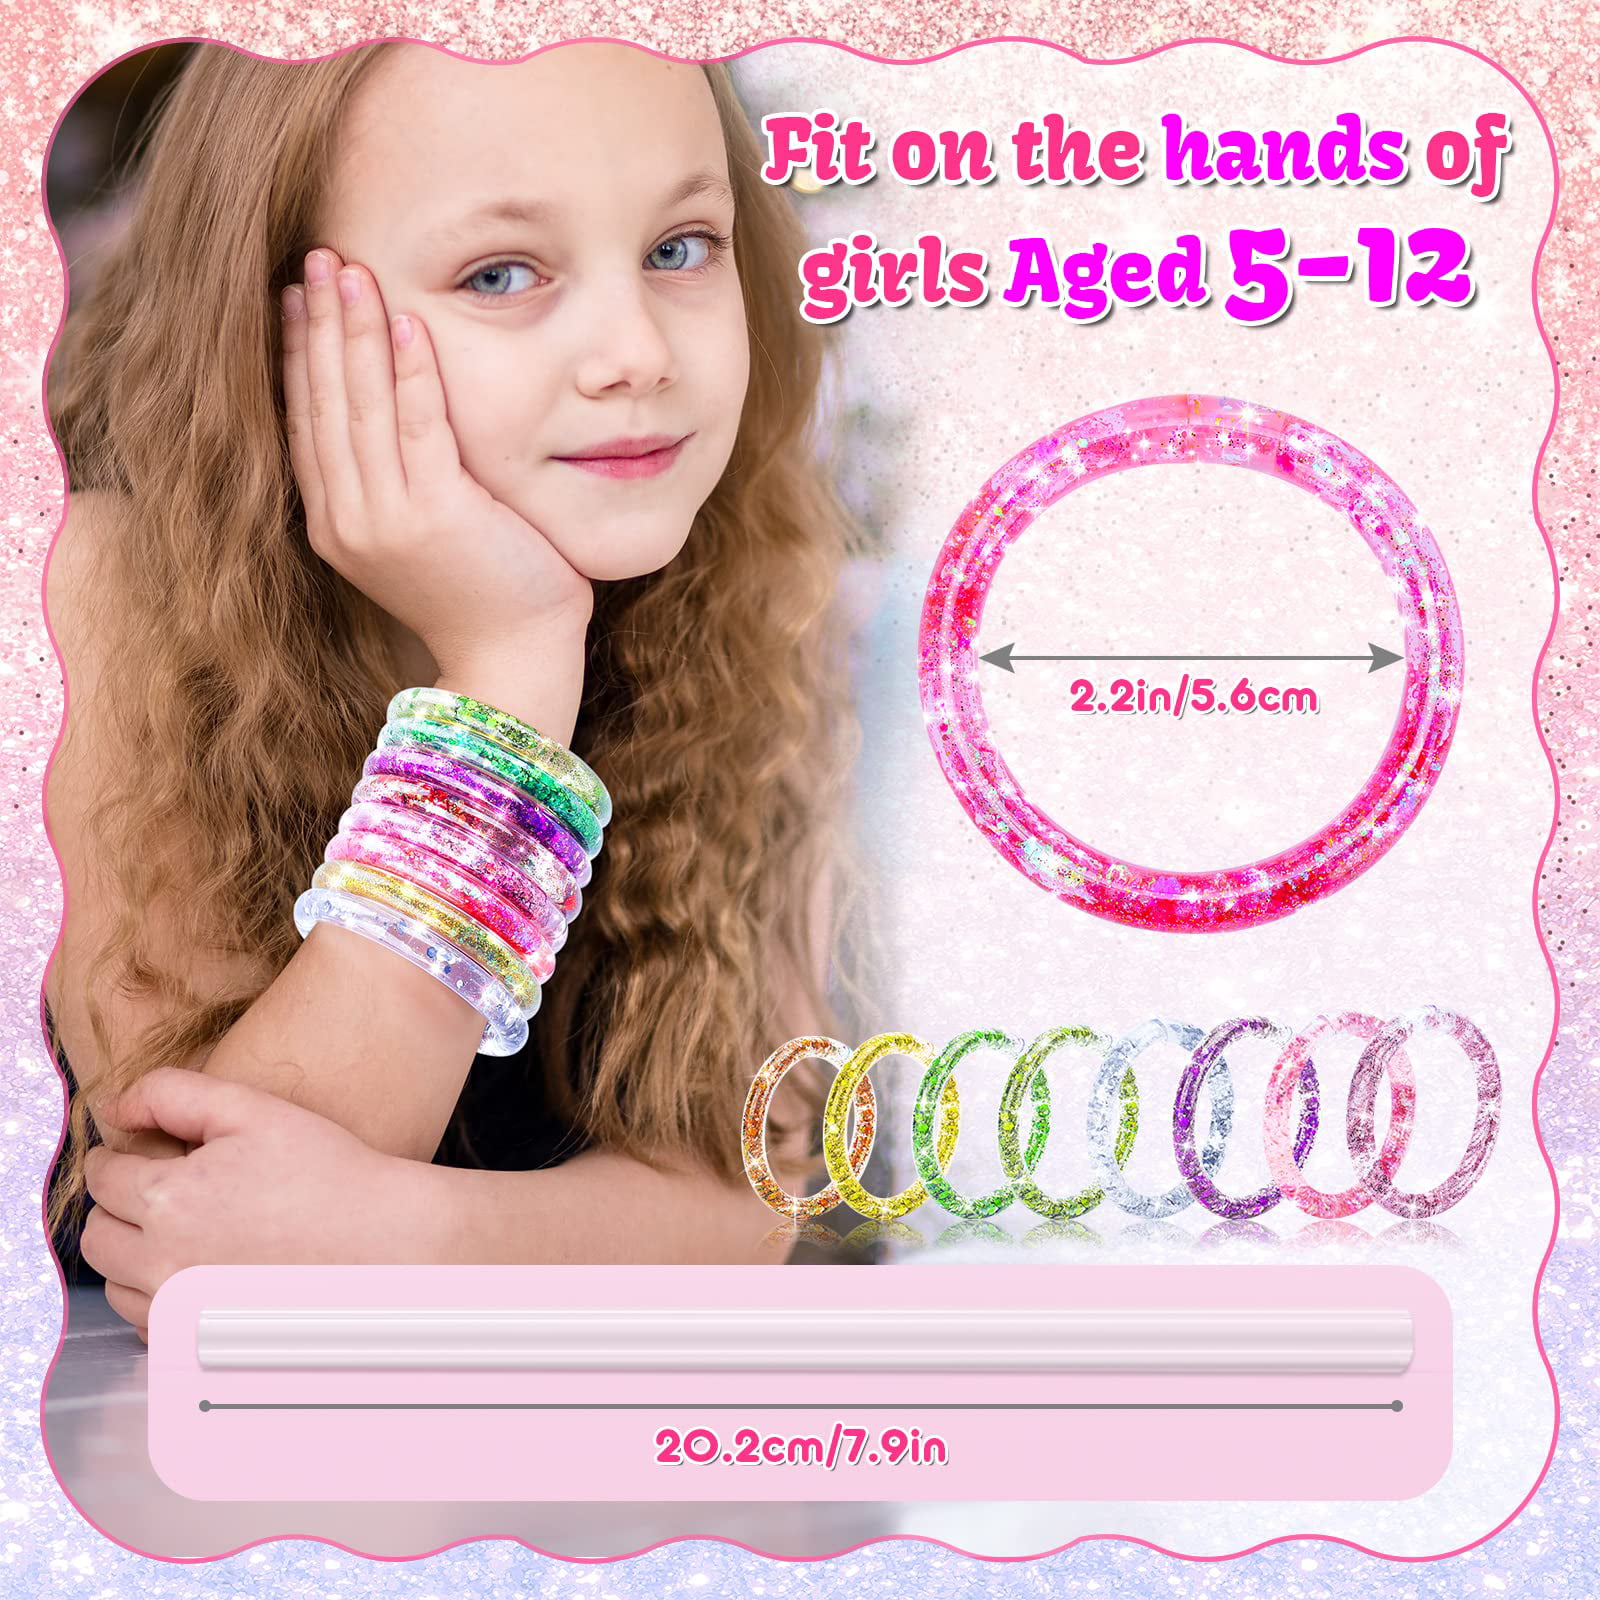 5 6 7 8 9 10 Year Old Girl Gifts, Art and Craft for Kids Age 6-8 Gifts for Girl Toys Age 6-12 Crafts for Girls Ages 7-10 Art Kit Toys for Girls